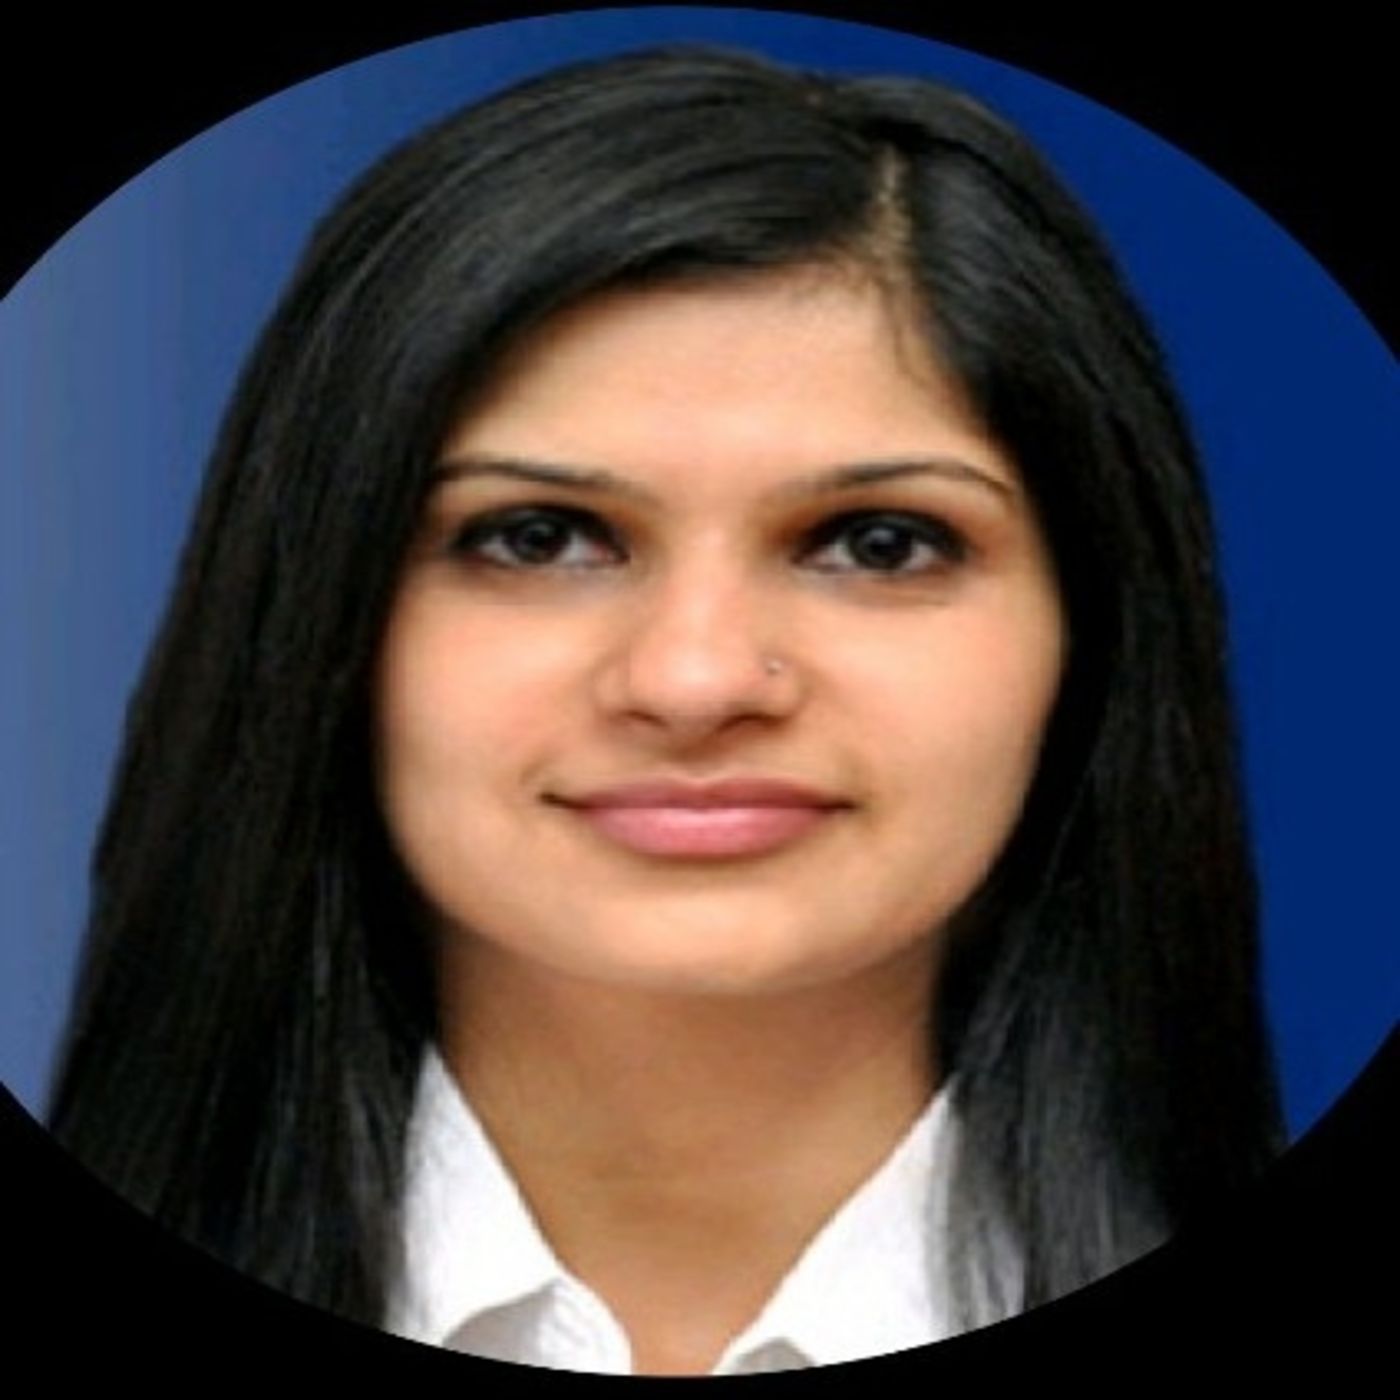 Interview with Rachita Kapoor about trends and jobs in the instructional design field